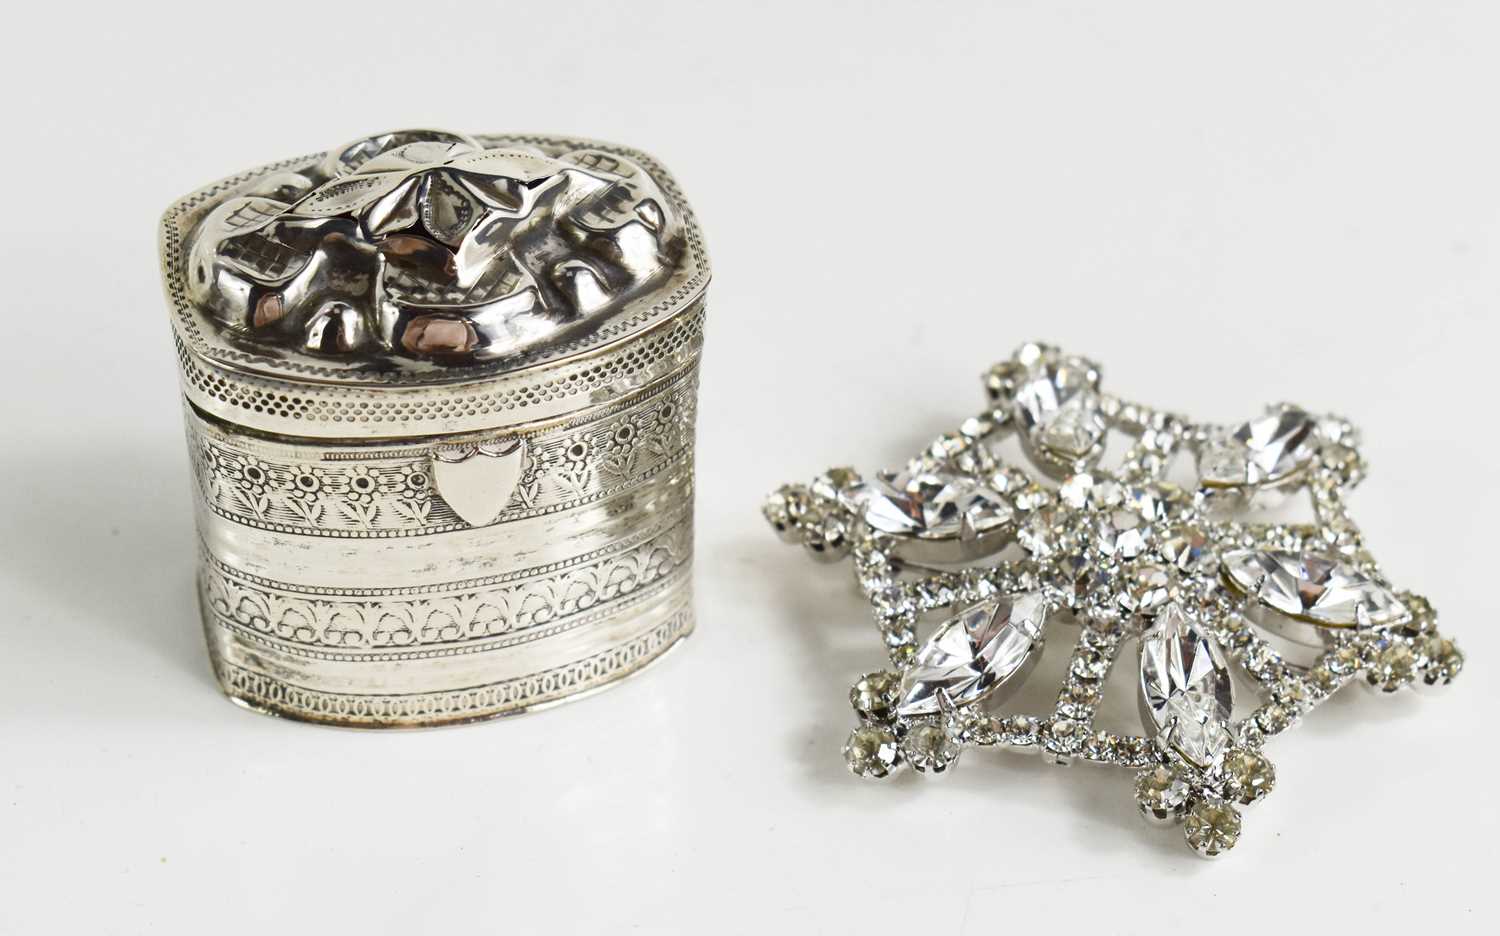 A Continental silver trinket box, possibly Dutch, together with a diamante brooch.